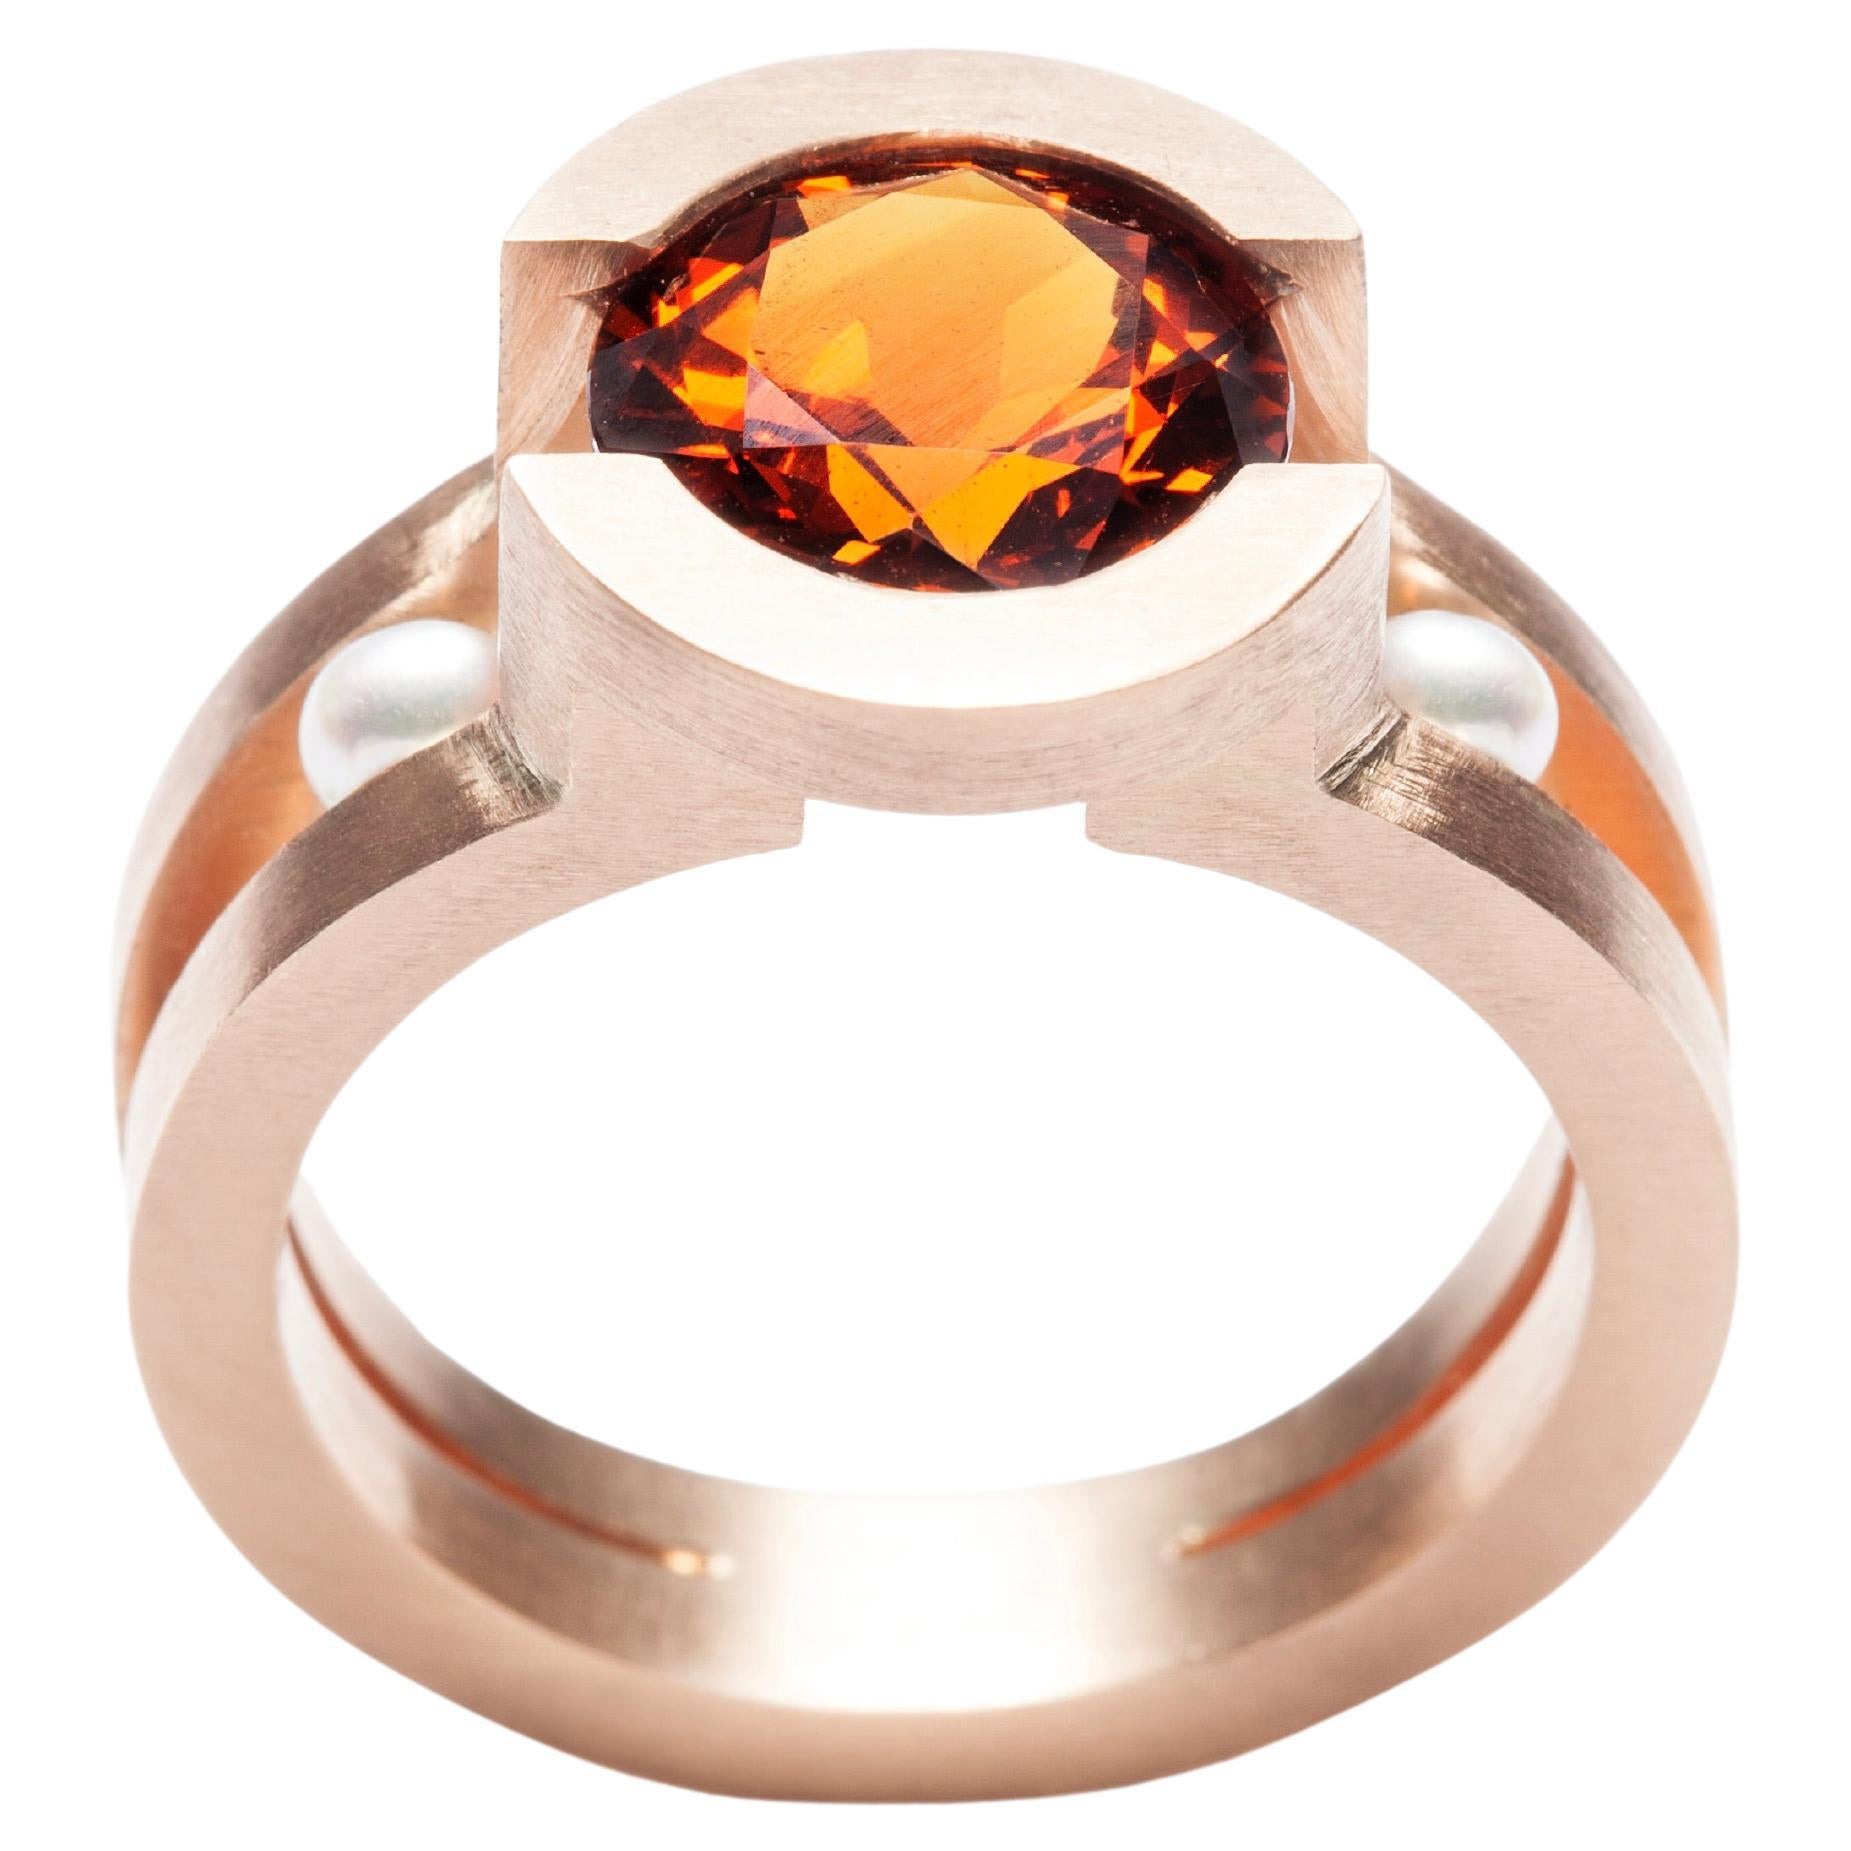 Tholos Ring in 18kt Pink Gold Set with Spessartite Garnet and Pearls by Serafino For Sale